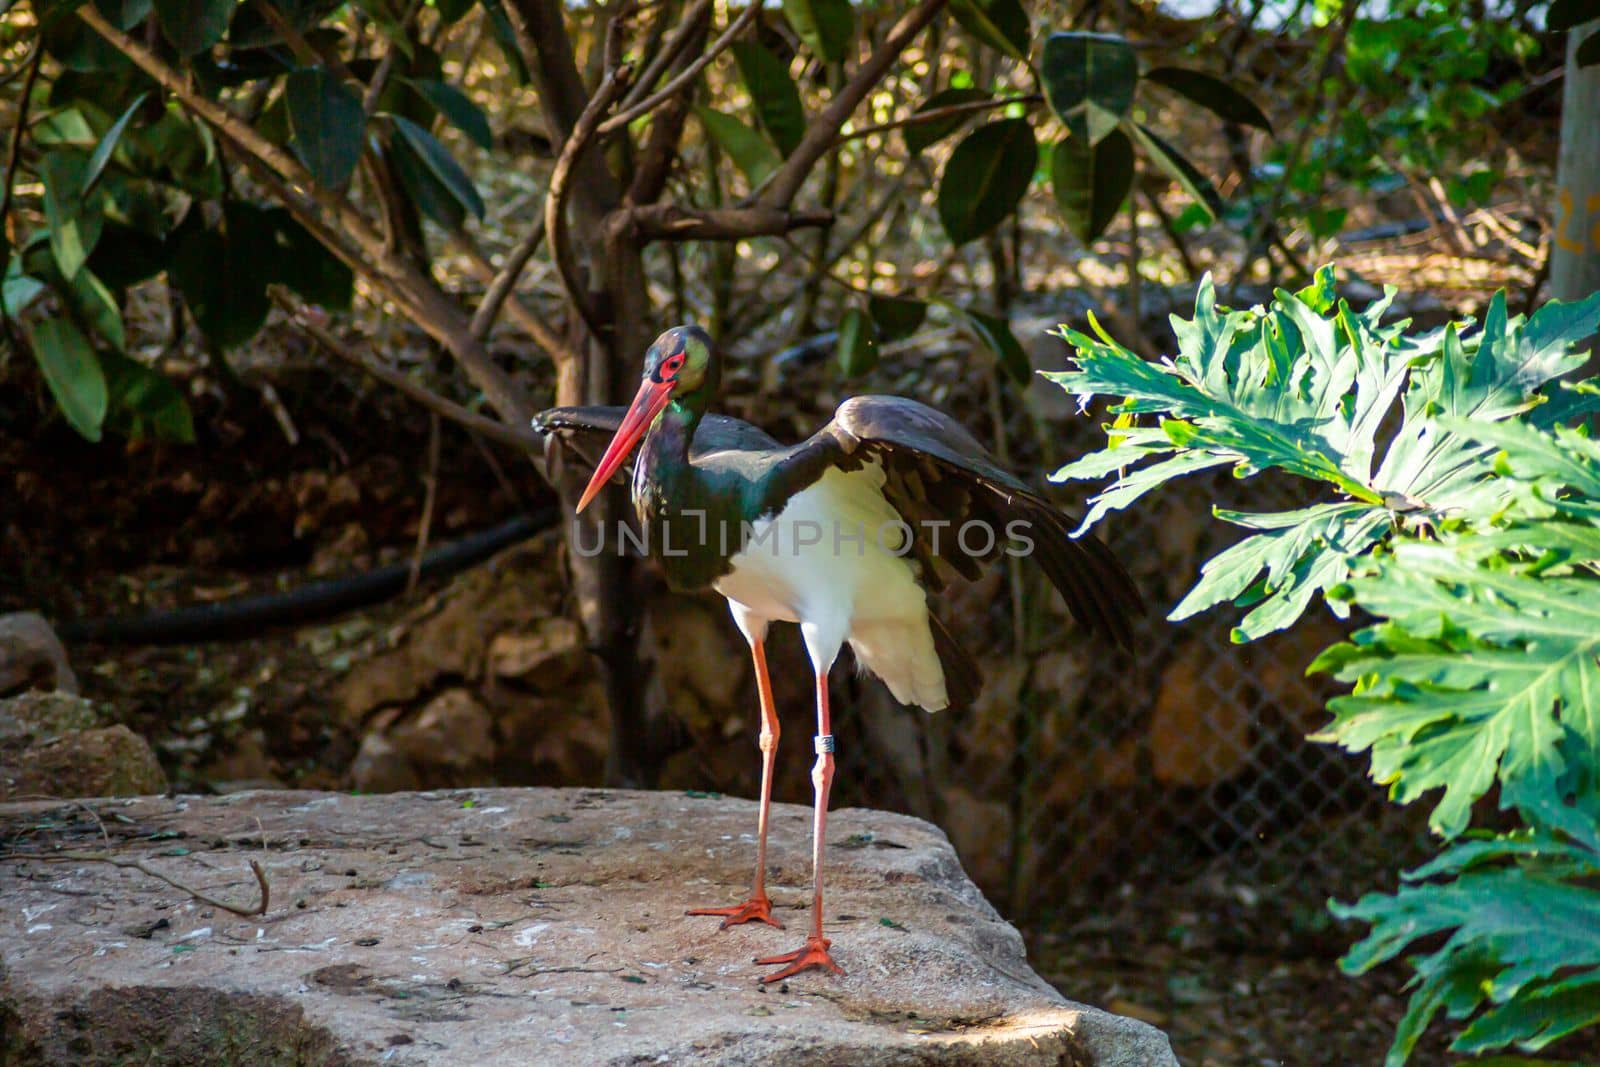 Black stork in the zoo in the forest.